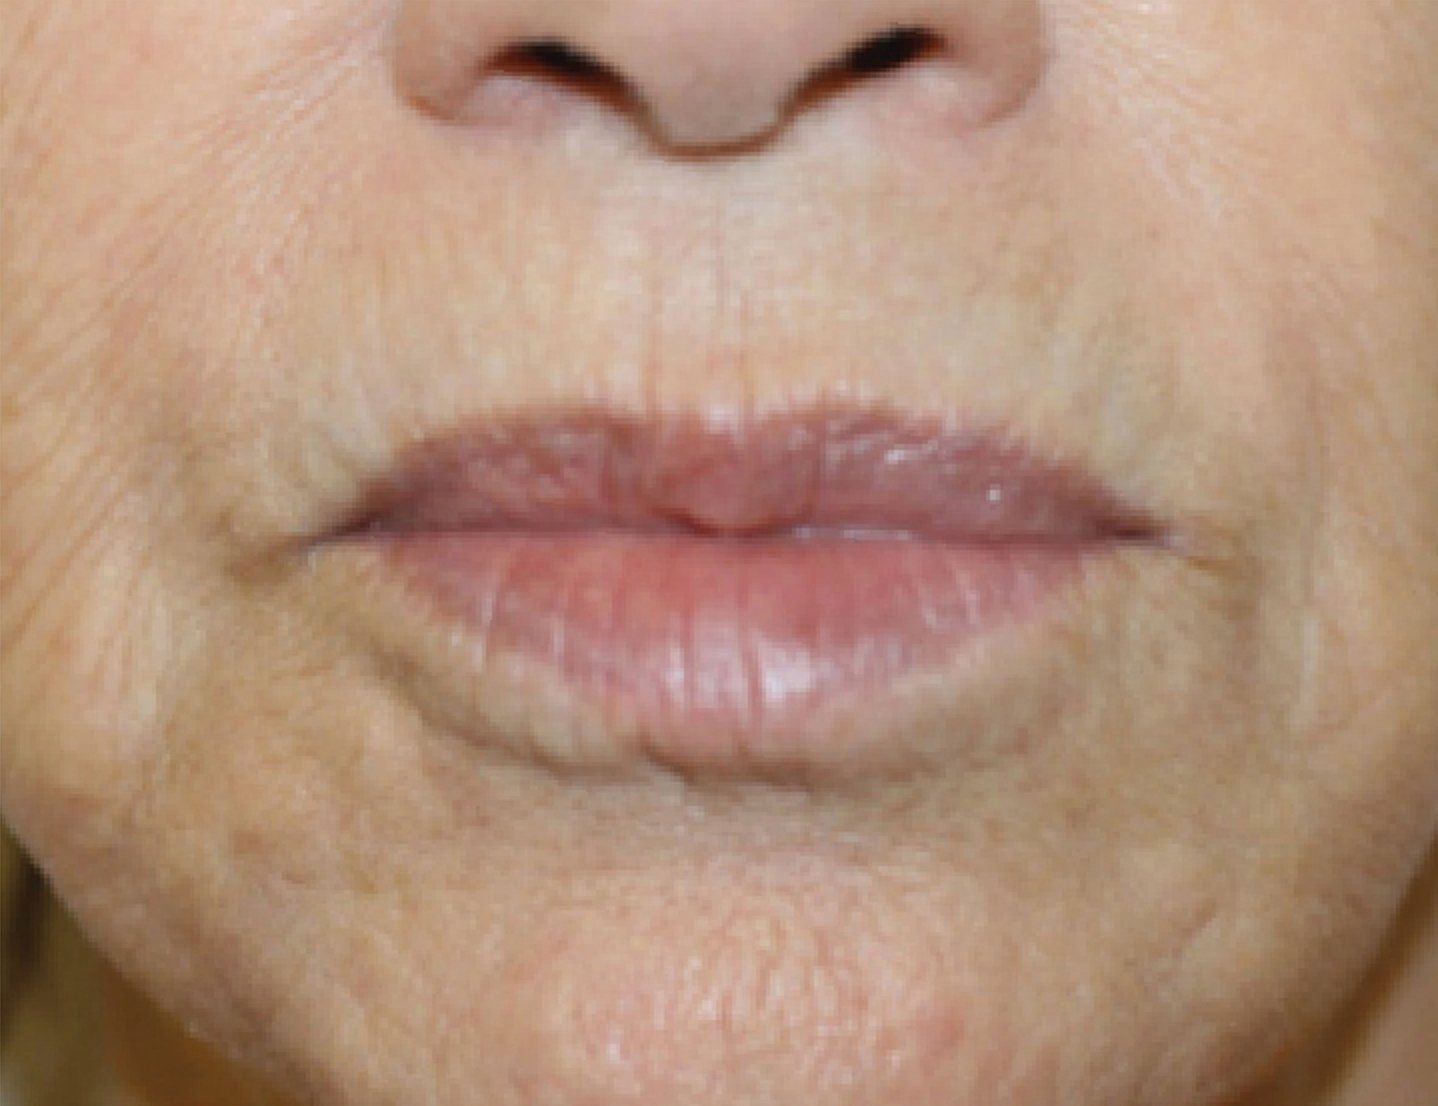 BBL After Photo - A close up of a woman's lips with reduced wrinkles 